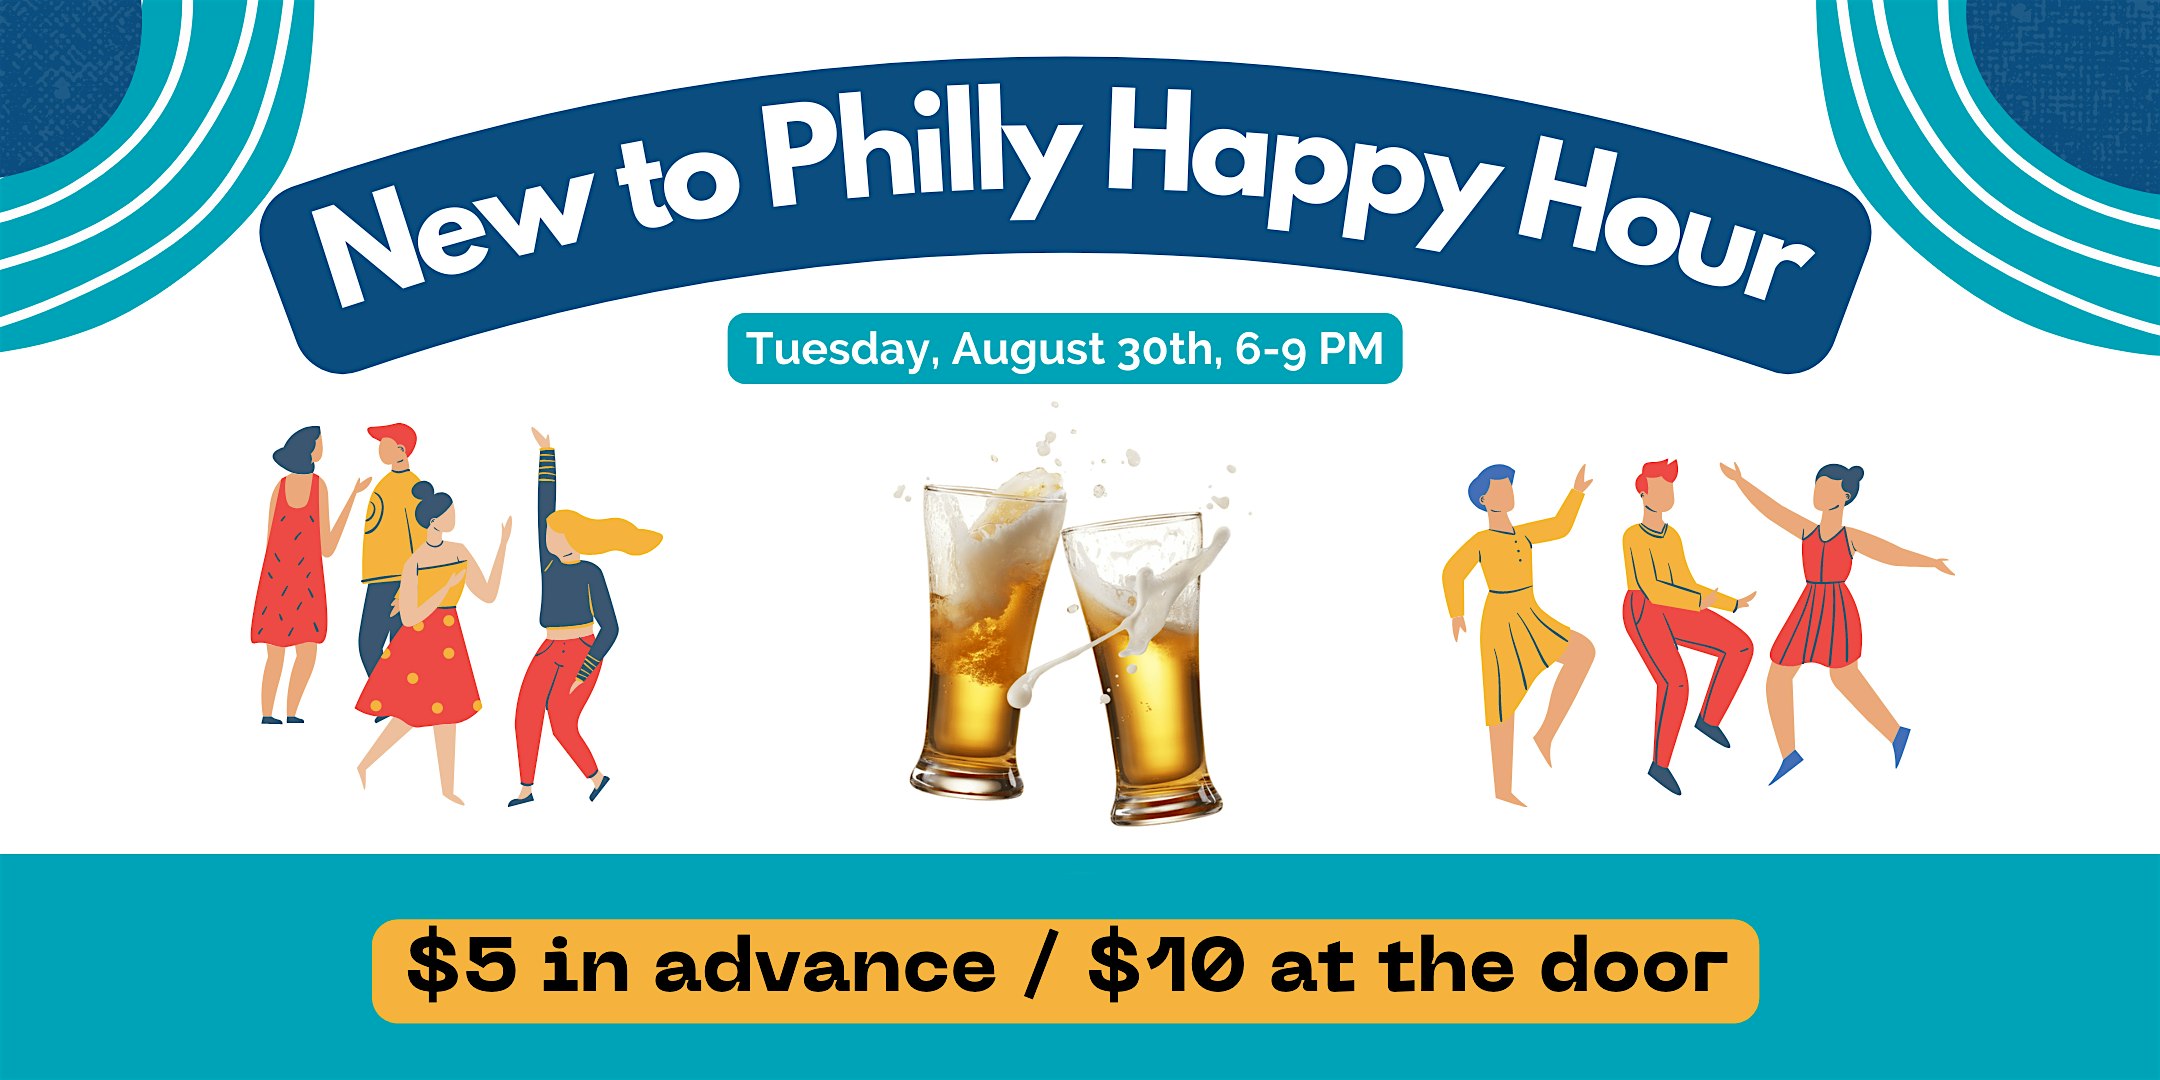 New To Philly Happy Hour